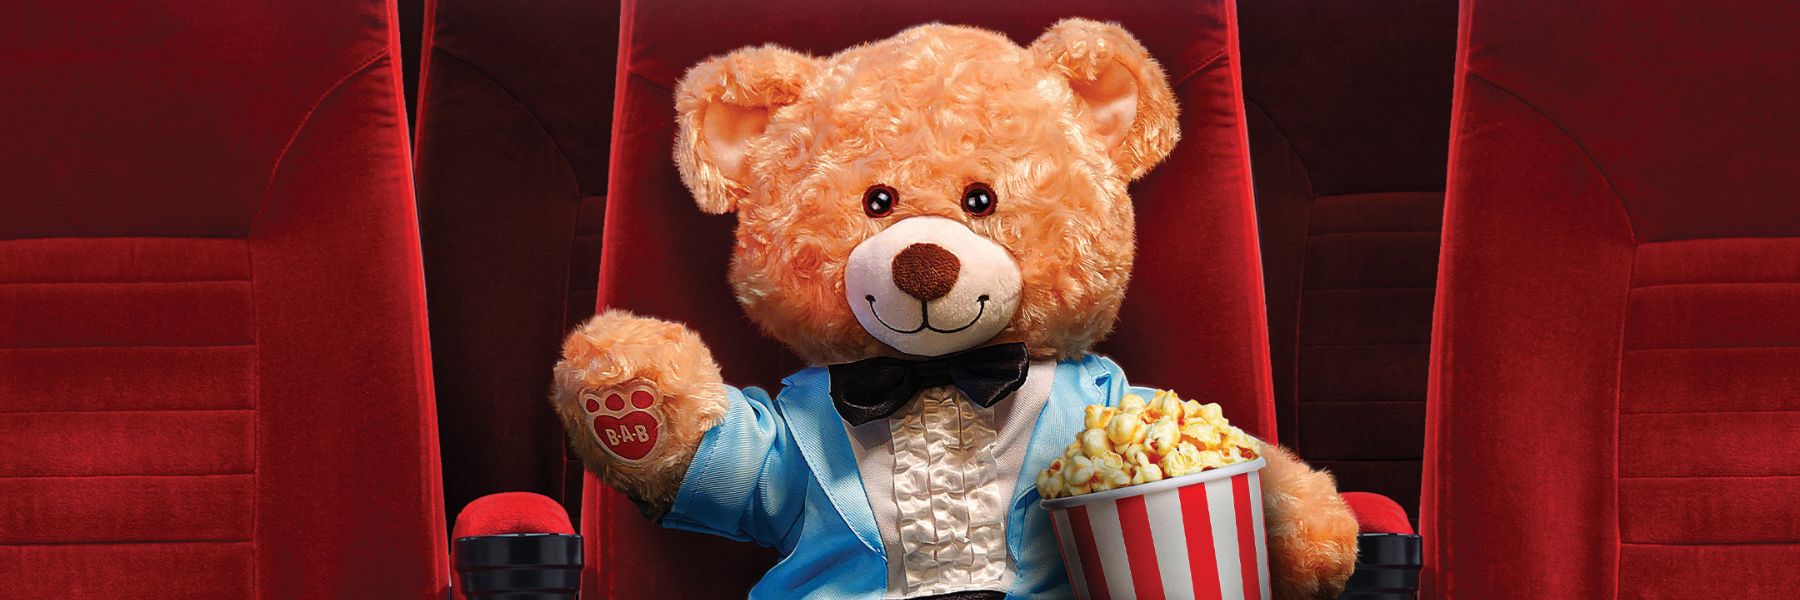 Build-A-Bear Workshop has released a documentary about its 25-year journey.